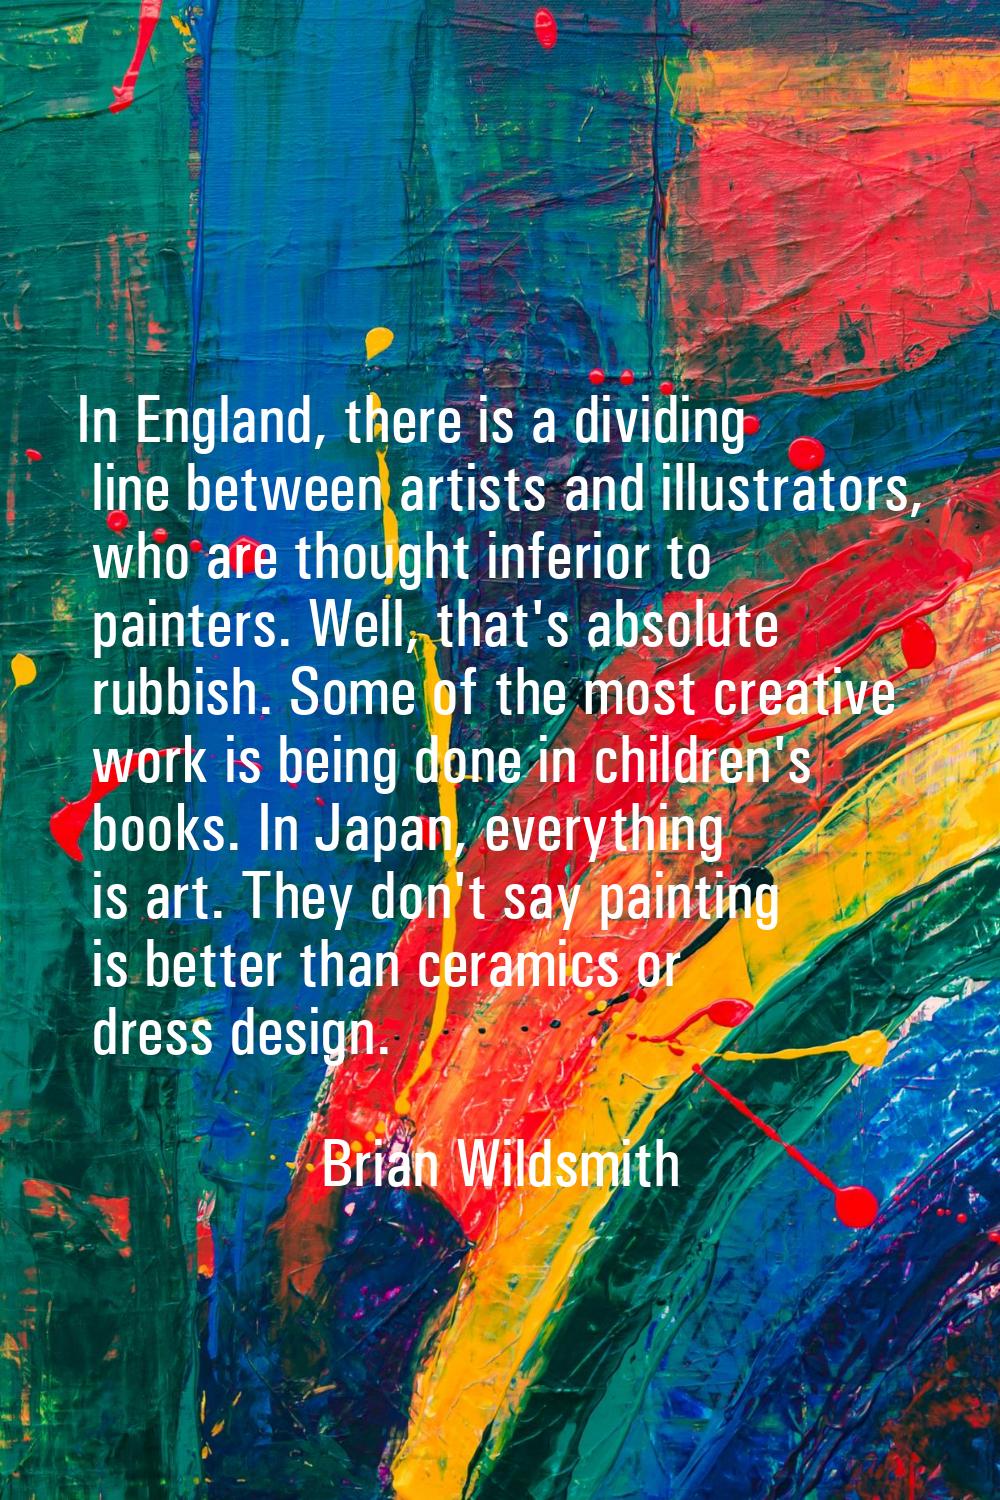 In England, there is a dividing line between artists and illustrators, who are thought inferior to 